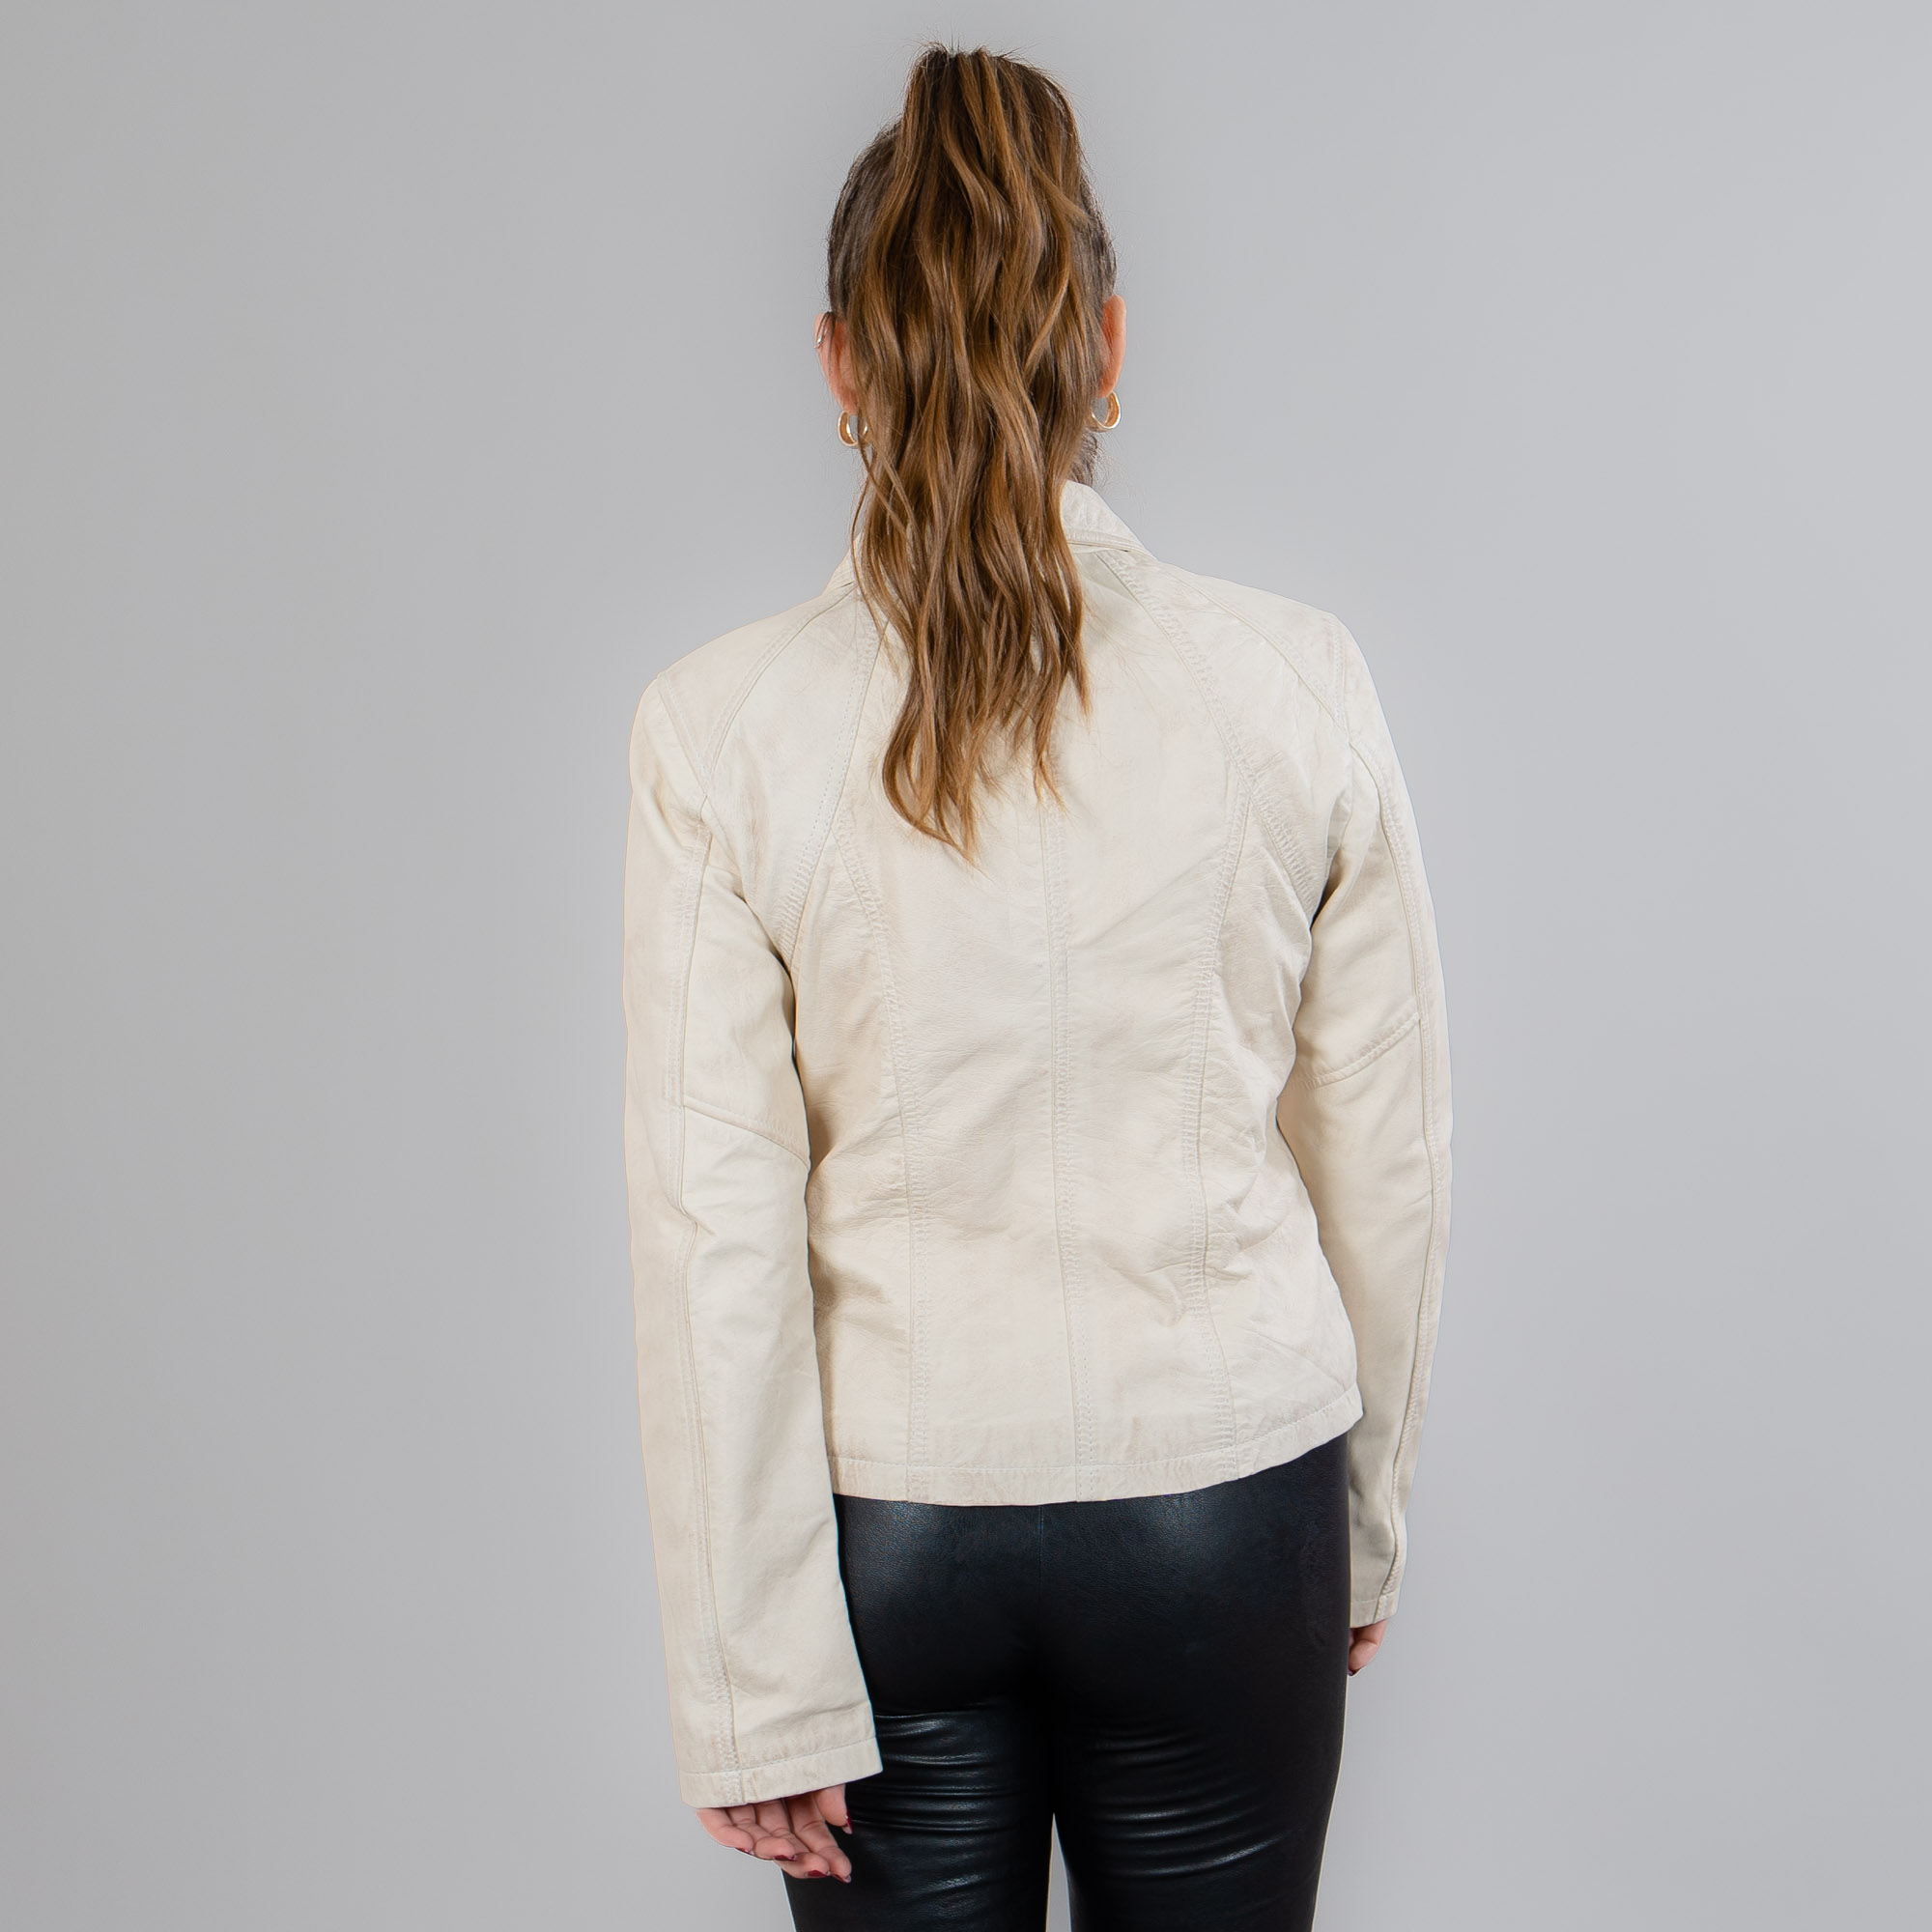 Lamb leather jacket in beige color